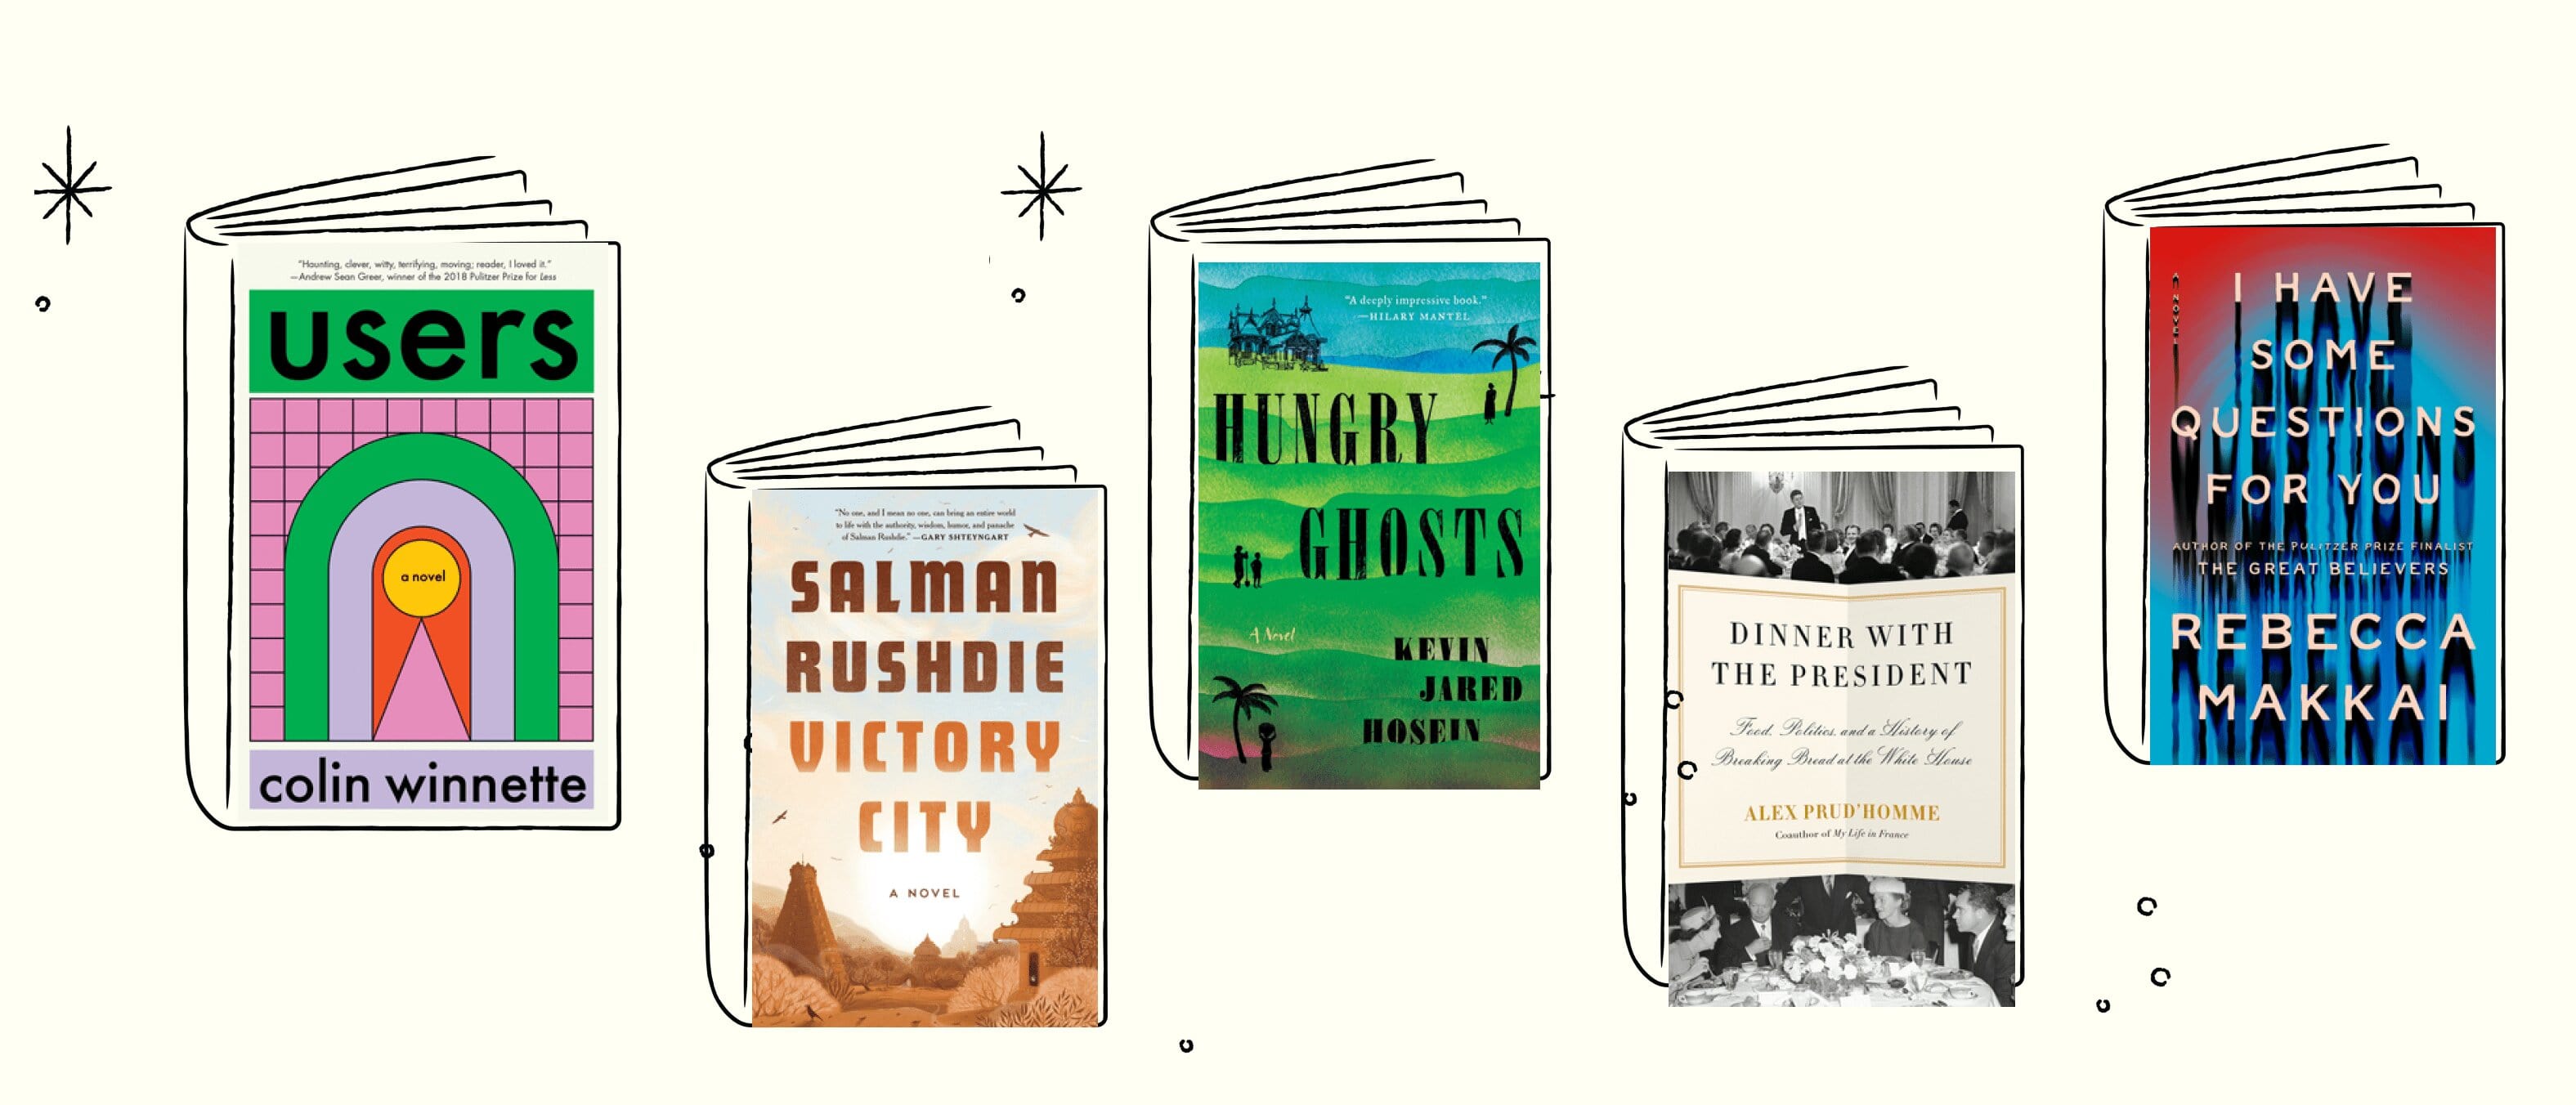 Article image for: 13 New Books Coming in February